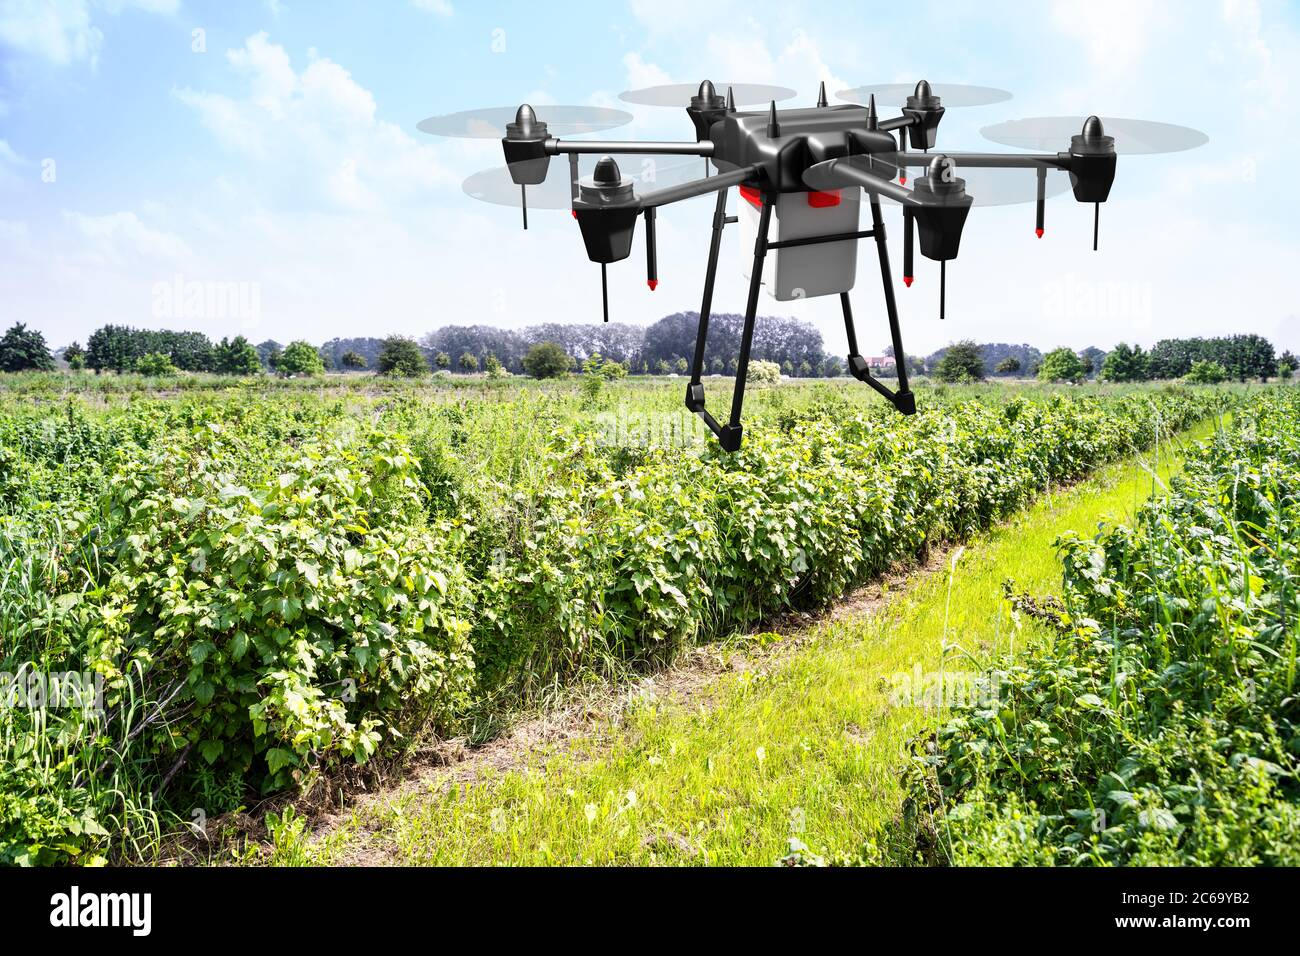 Agriculture Industry Farming Technology At Plant Field Or Farm Stock Photo